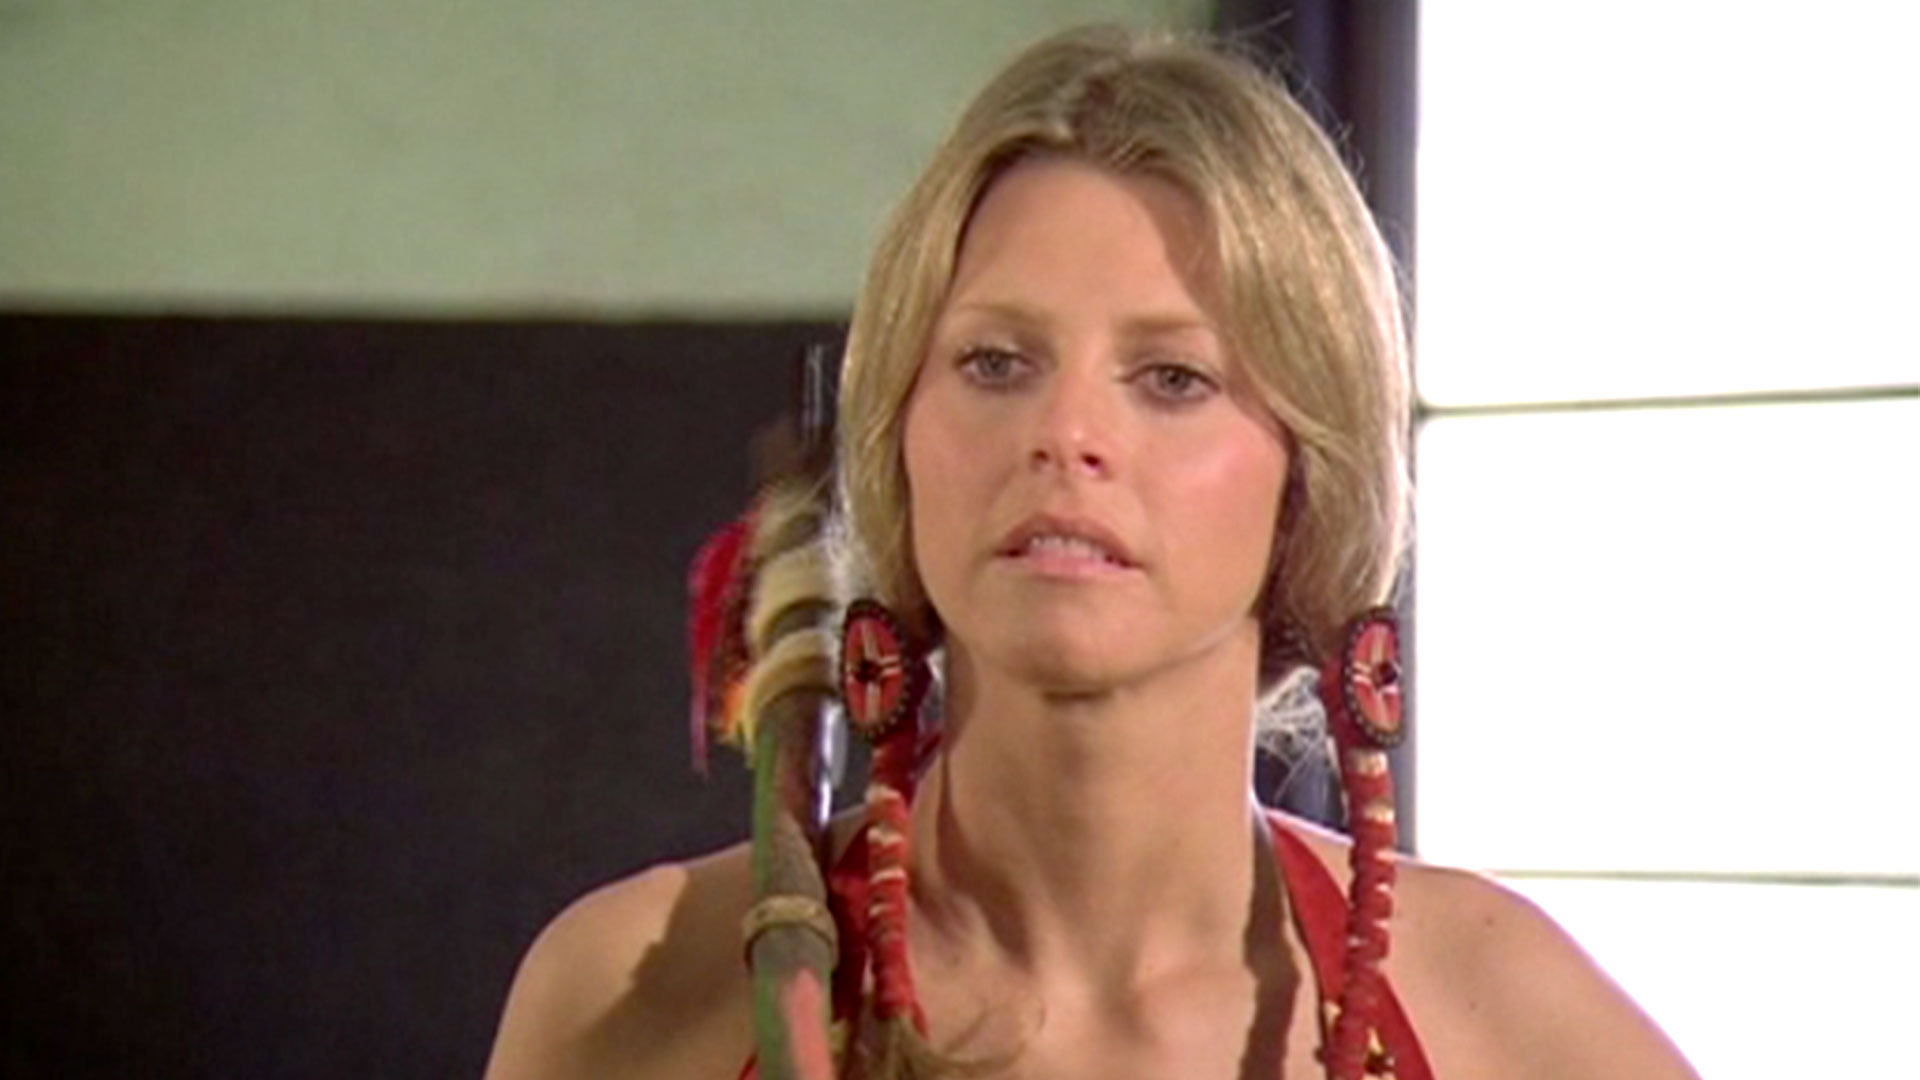 Watch The Bionic Woman Episode: In This Corner, Jaime Sommers - NBC.com1920 x 1080